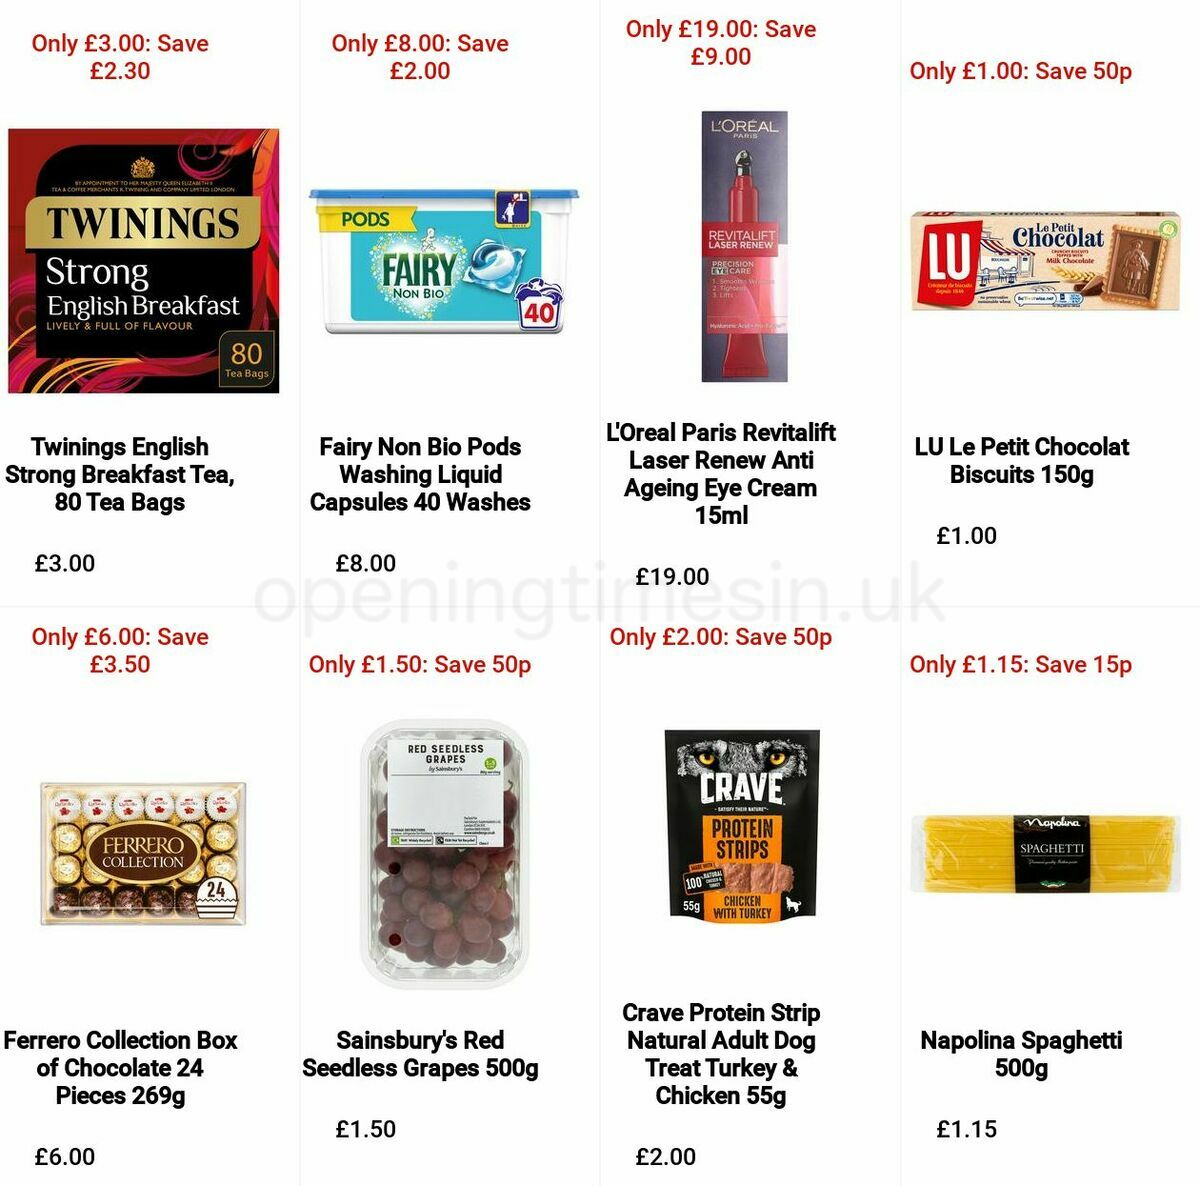 Sainsbury's Offers from 18 March